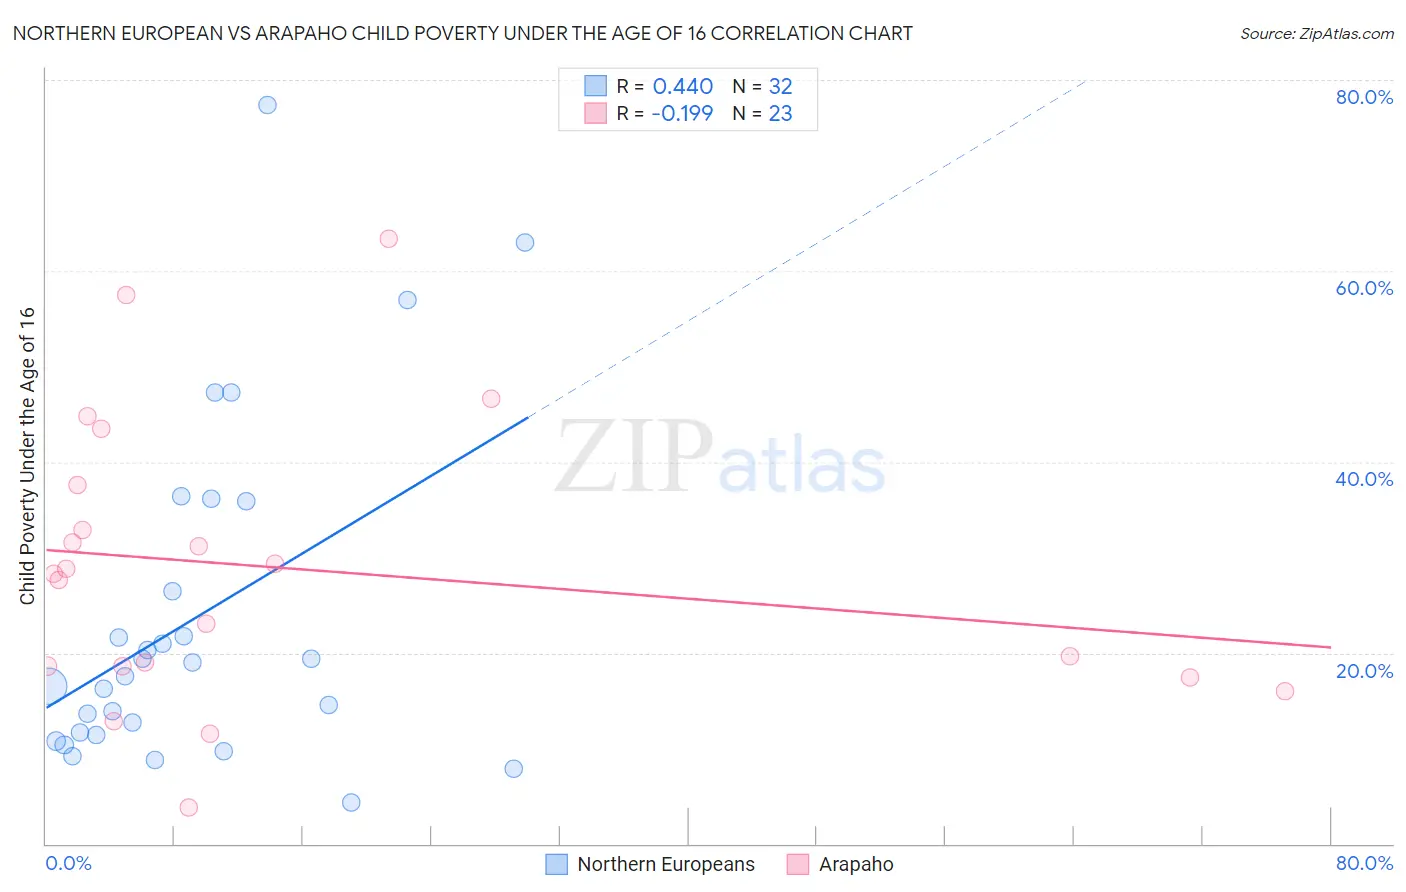 Northern European vs Arapaho Child Poverty Under the Age of 16